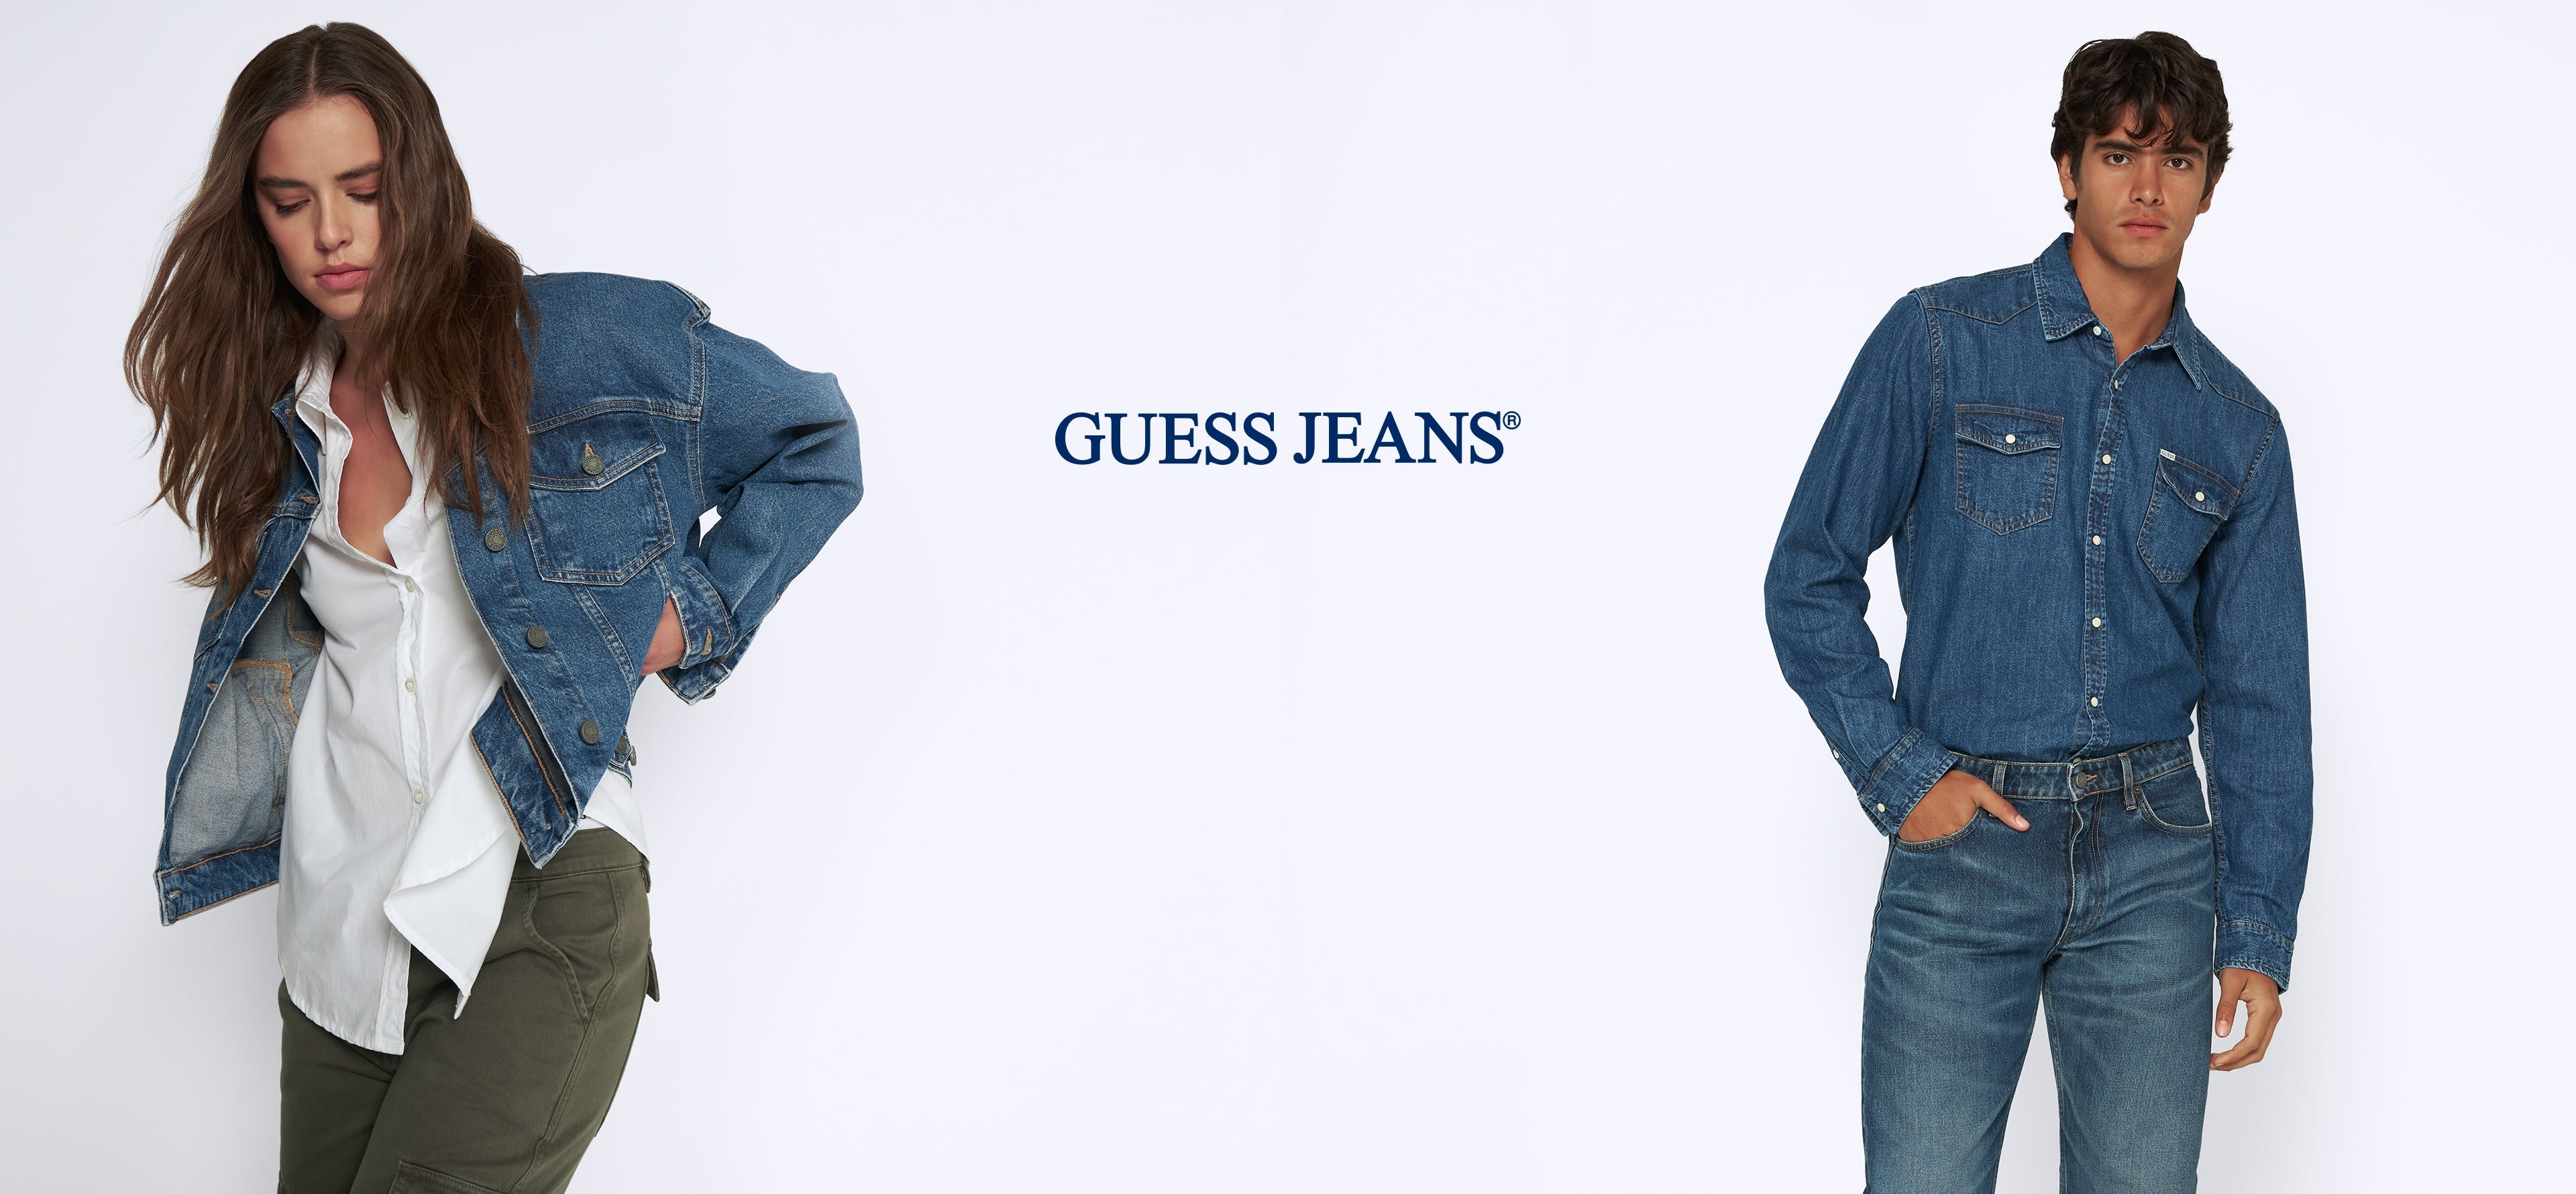 Discover GUESS Jeans: The Next<br> 40 years of denim for women and men.